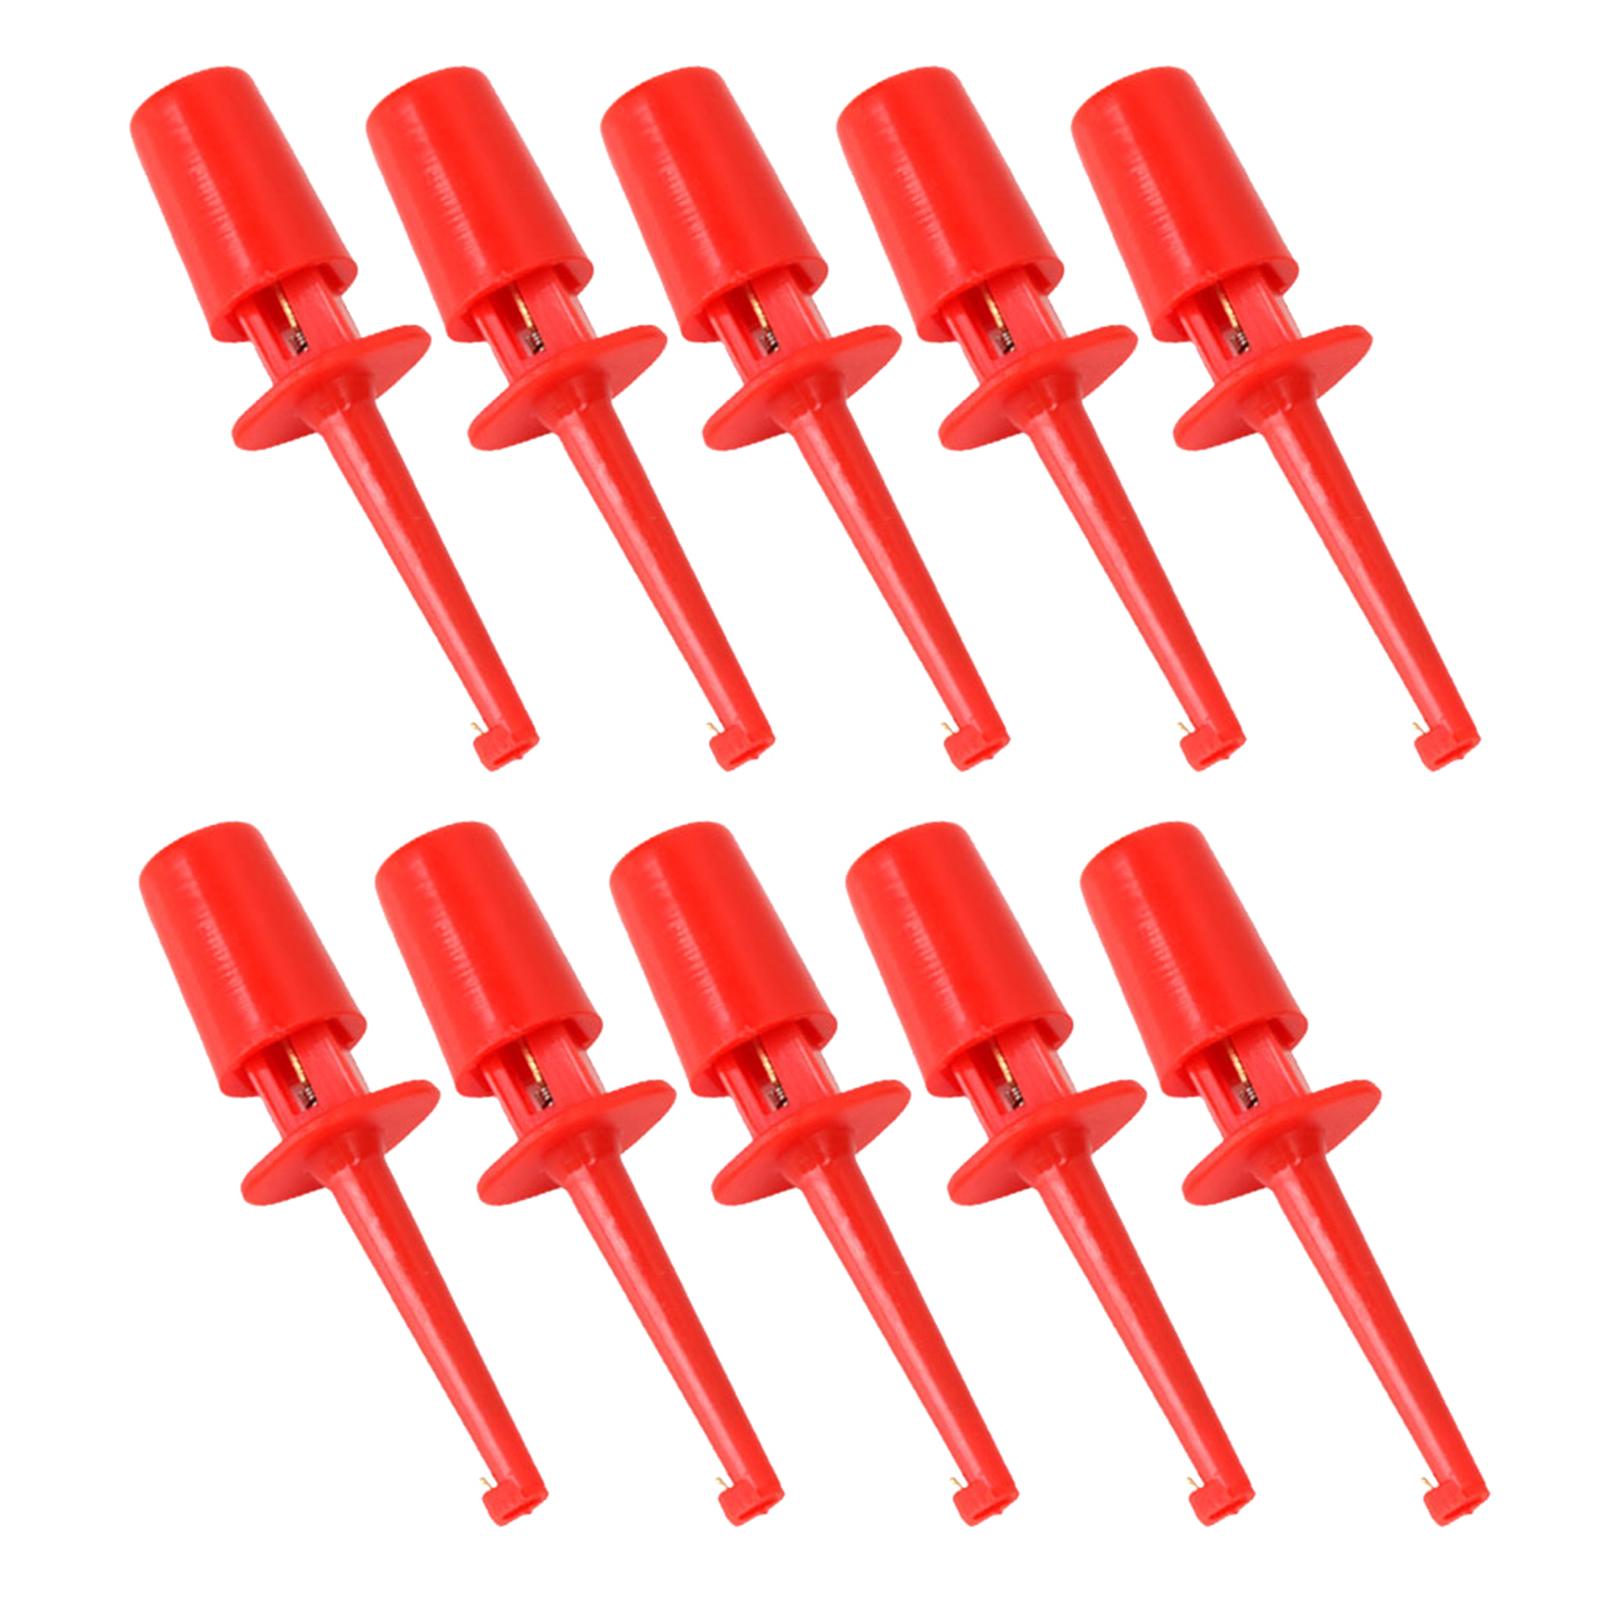 10 x Mini Test Hook Probe Spring Clip for PCB SMD IC Red